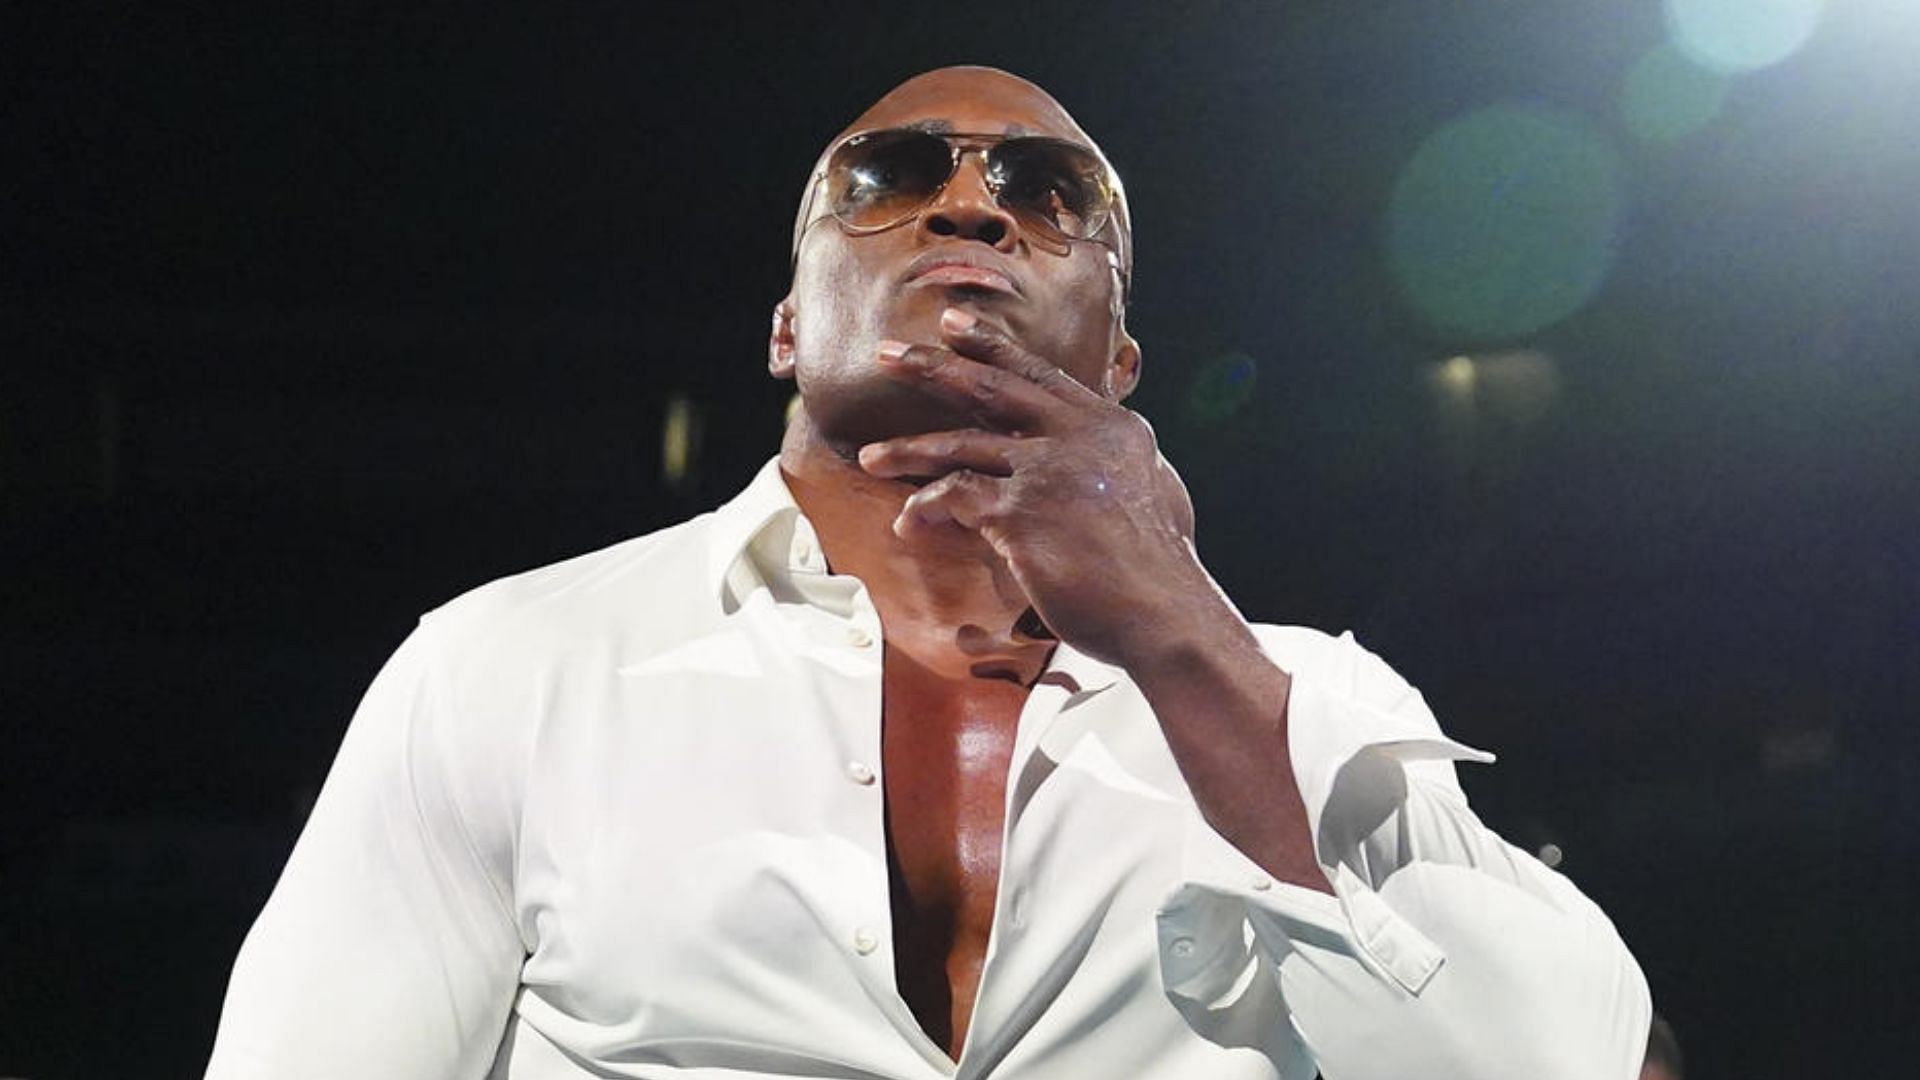 Bobby Lashley is a member of the SmackDown roster